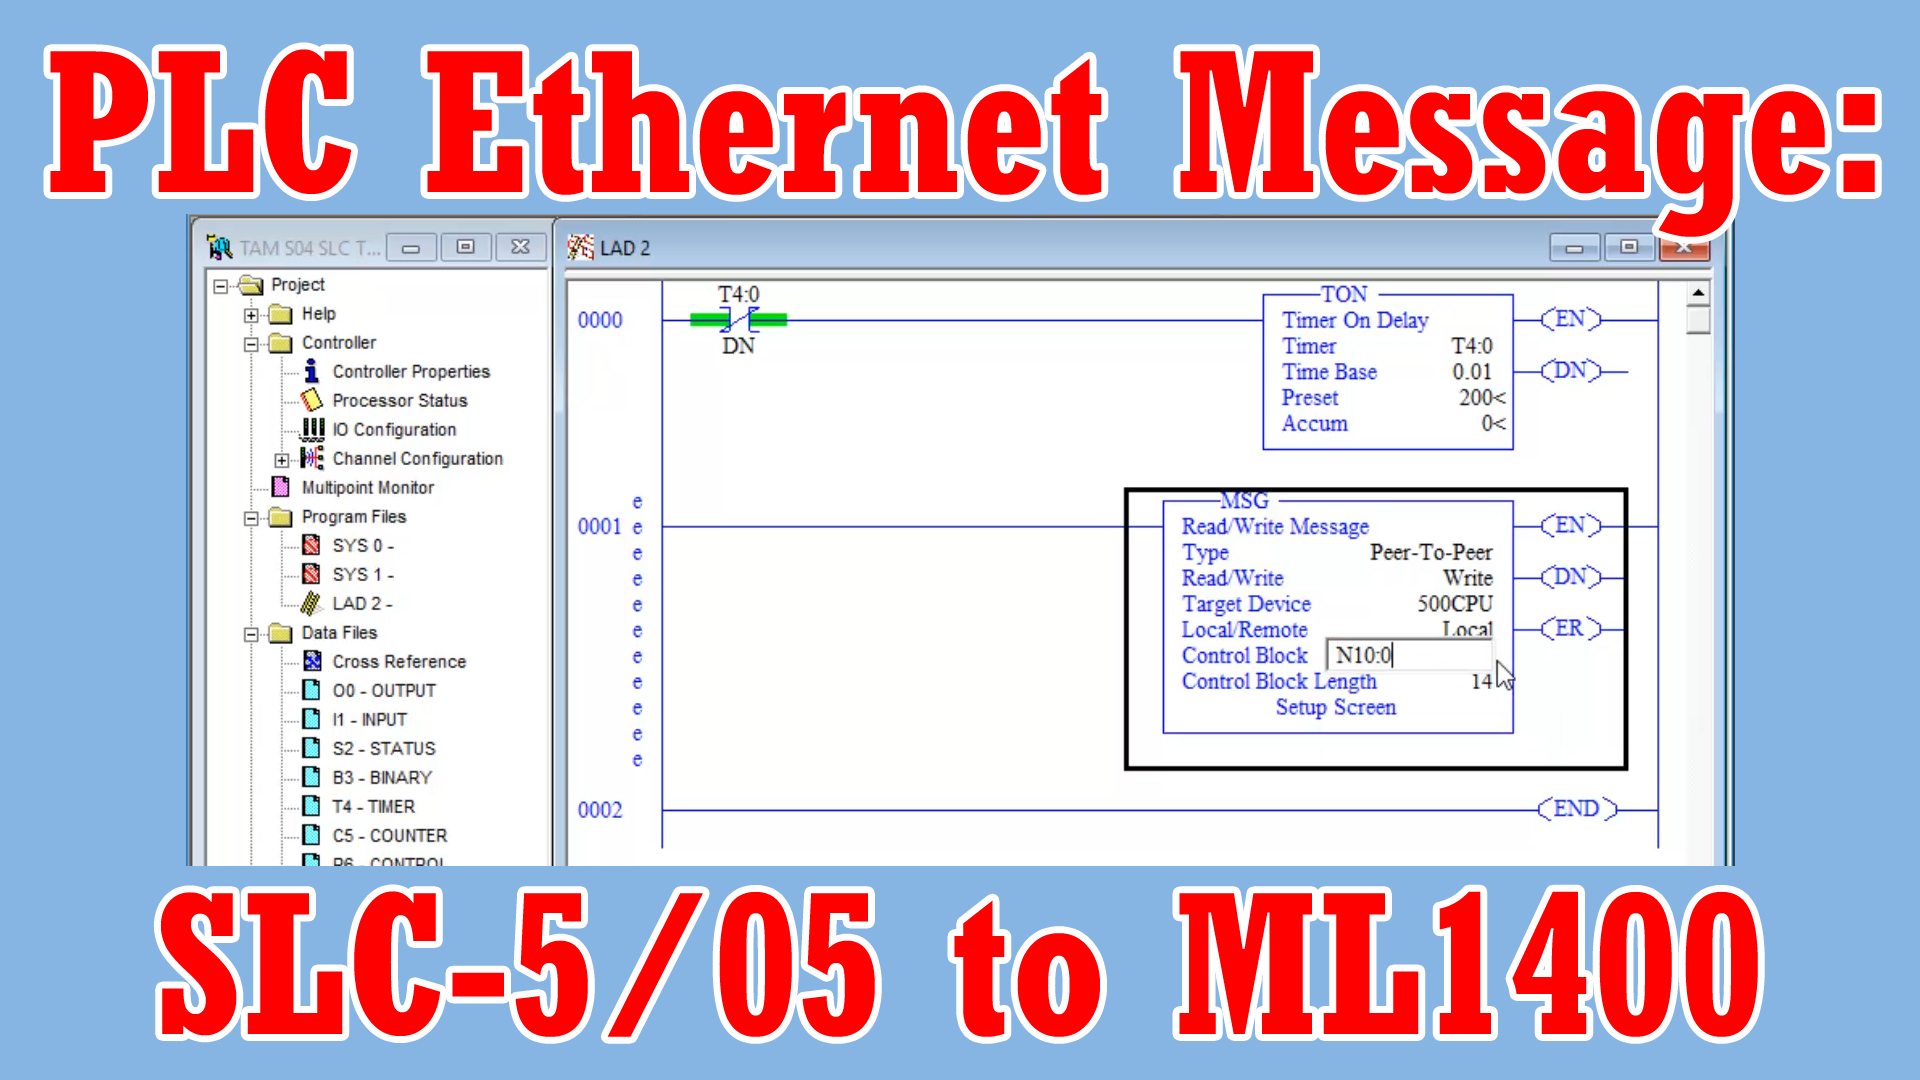 Message (MSG) - SLC-5/05 Writing Data Over Ethernet to a MicroLogix (M4E42)